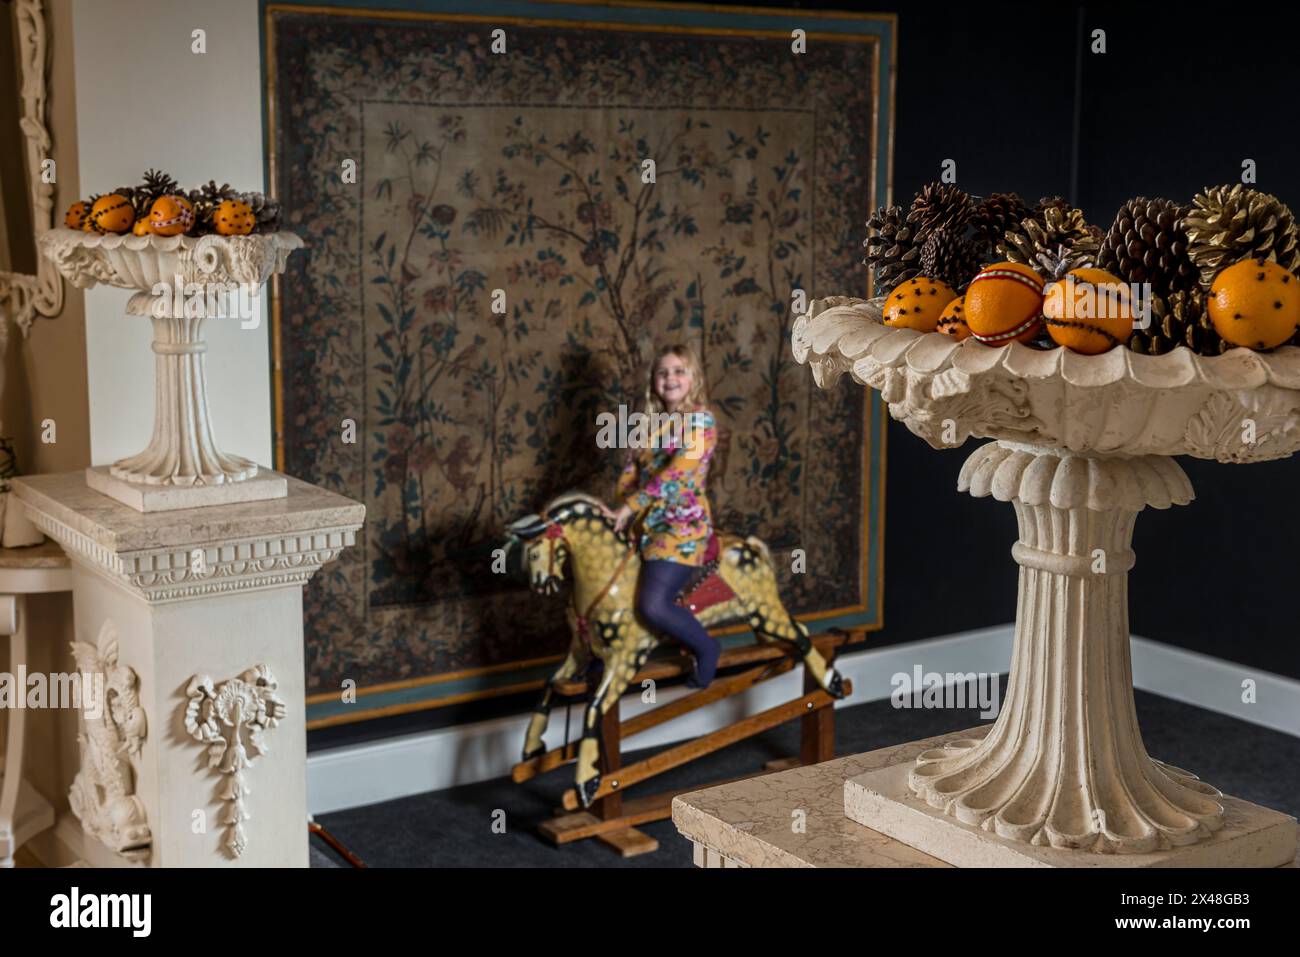 Girl on antique rocking horse and urns with fruit in Dorset family home at Christmas, England, UK Stock Photo